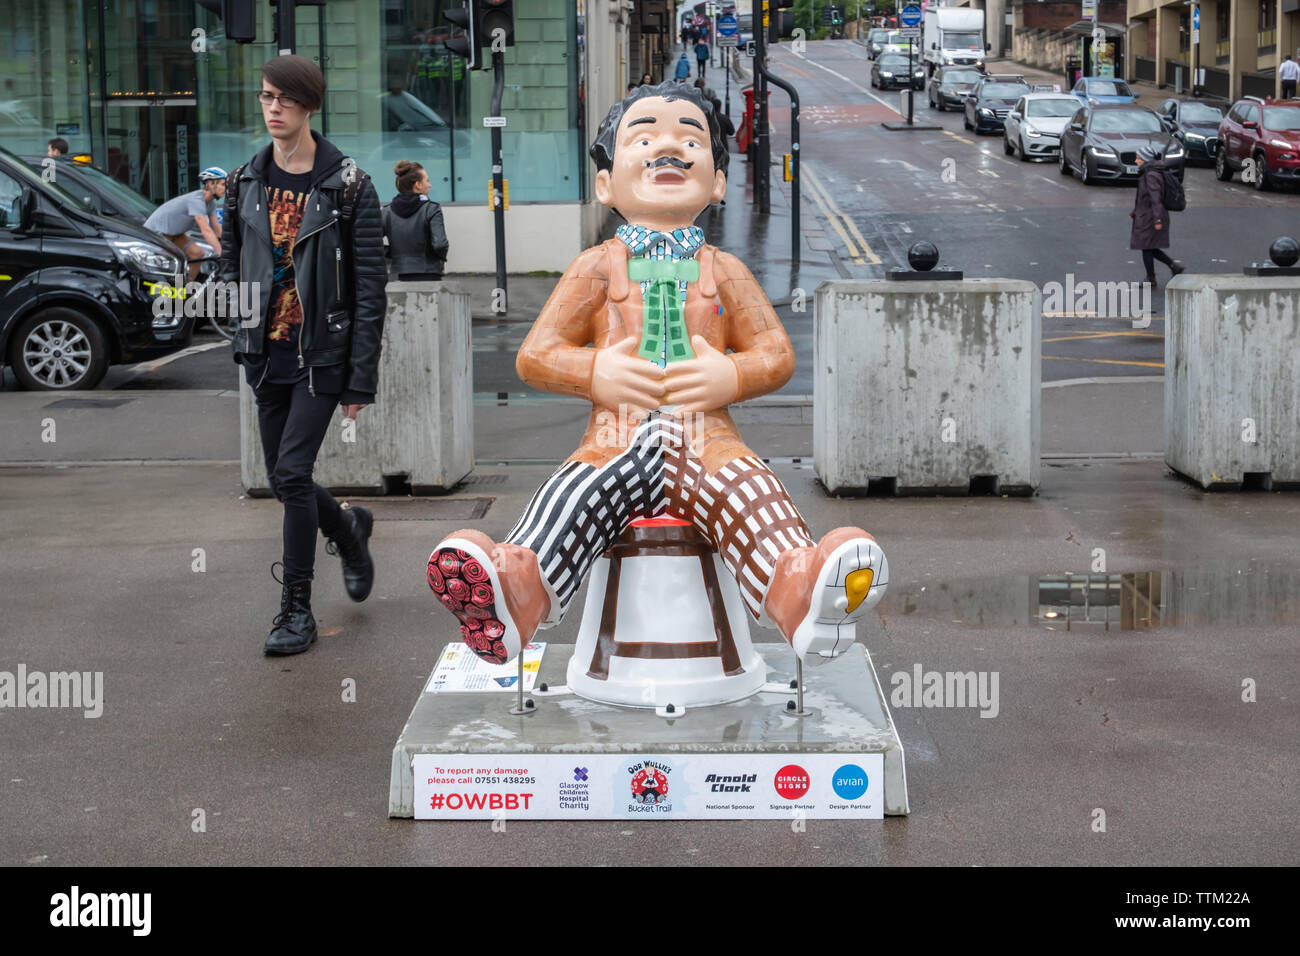 Glasgow, Scotland, UK. 17th June, 2019. Oor Charles, created by Laura Hallett. This statue sees Oor Wullie become one of Glasgow's most renowned artists and designers, Charles Rennie Mackintosh sitting on one of his famous funiture pieces. The work also includes stained glass windows, pattern design, architecture and interiors. His jacket mirrors the brickwork on The Glasgow School of Art. The sculpture is part of Oor Wullie’s BIG Bucket Trail. Credit: Skully/Alamy Live News Stock Photo